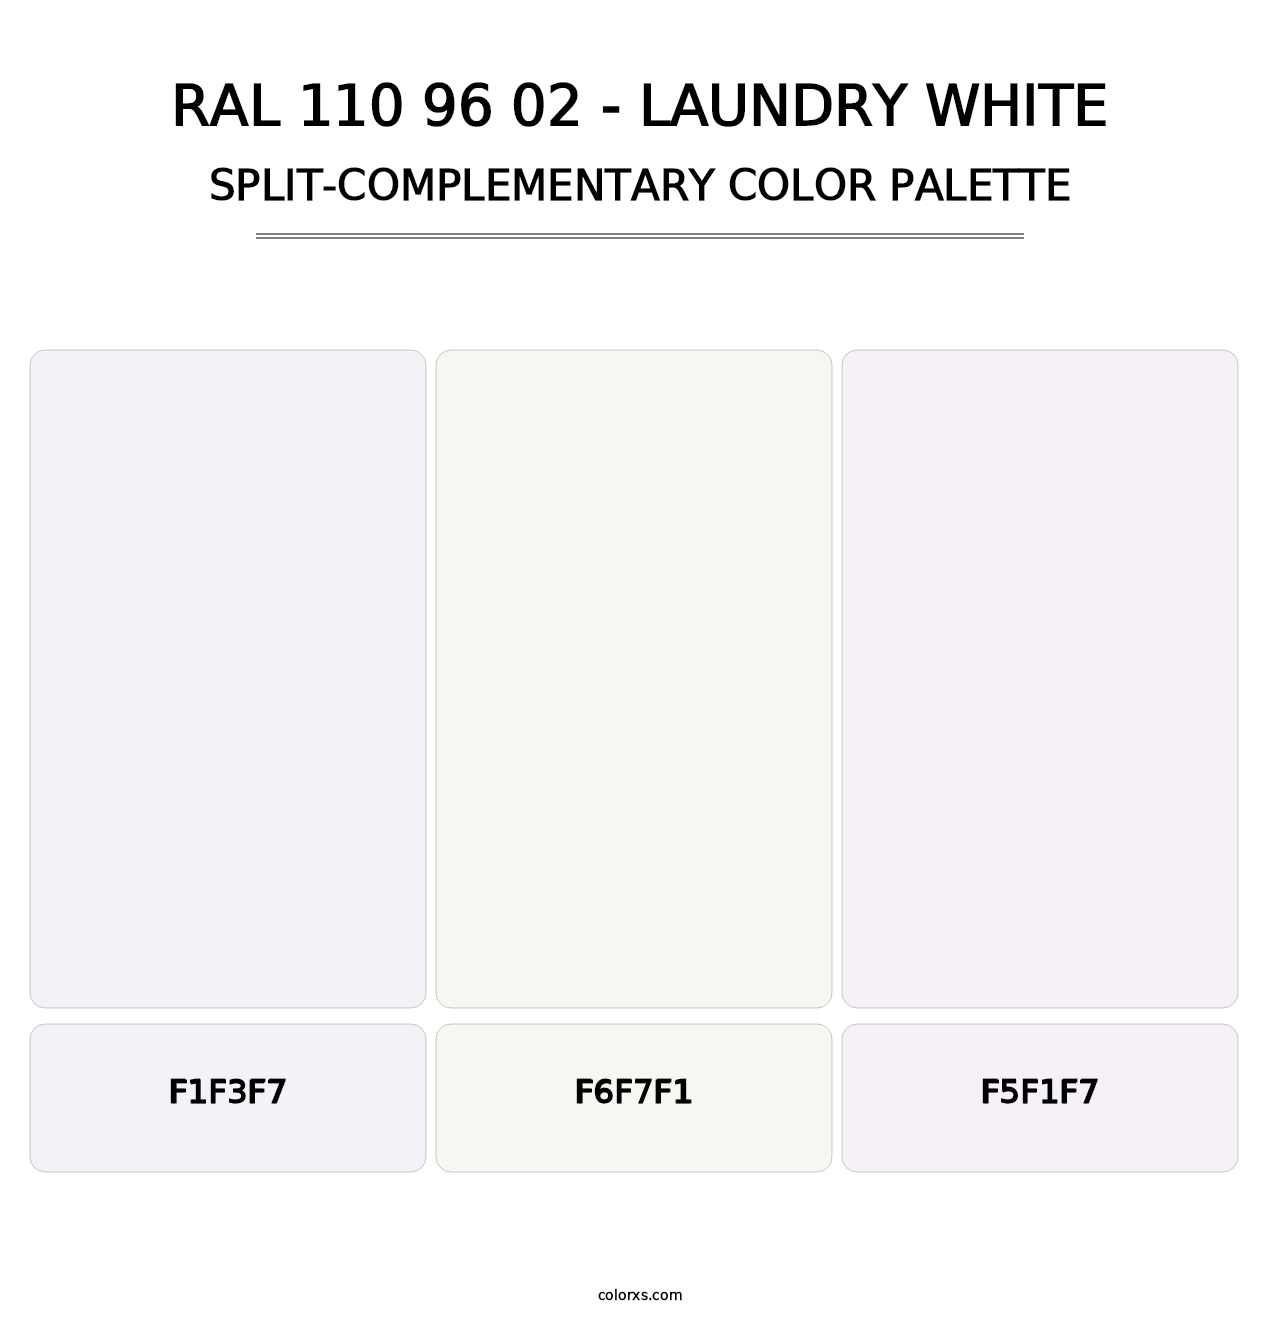 RAL 110 96 02 - Laundry White - Split-Complementary Color Palette